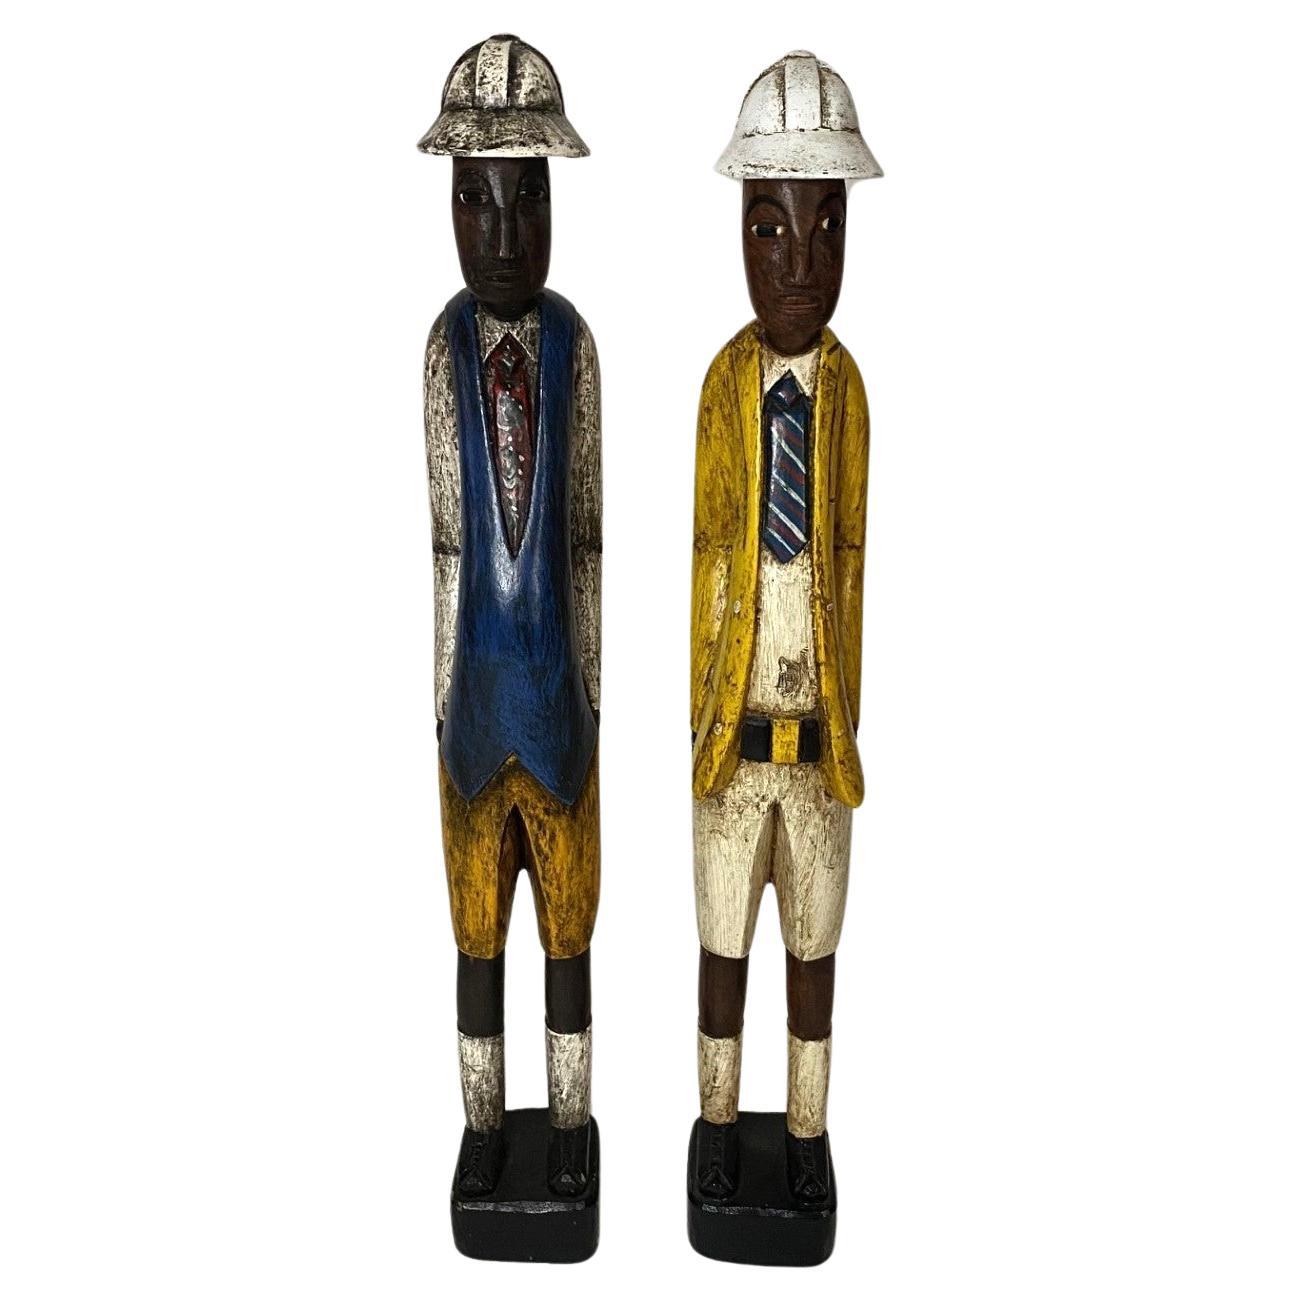 Two hand-carved and colorfully painted 20th century wood workmen. A whimsical pair with expressions we can all understand.
Decorative and interesting!